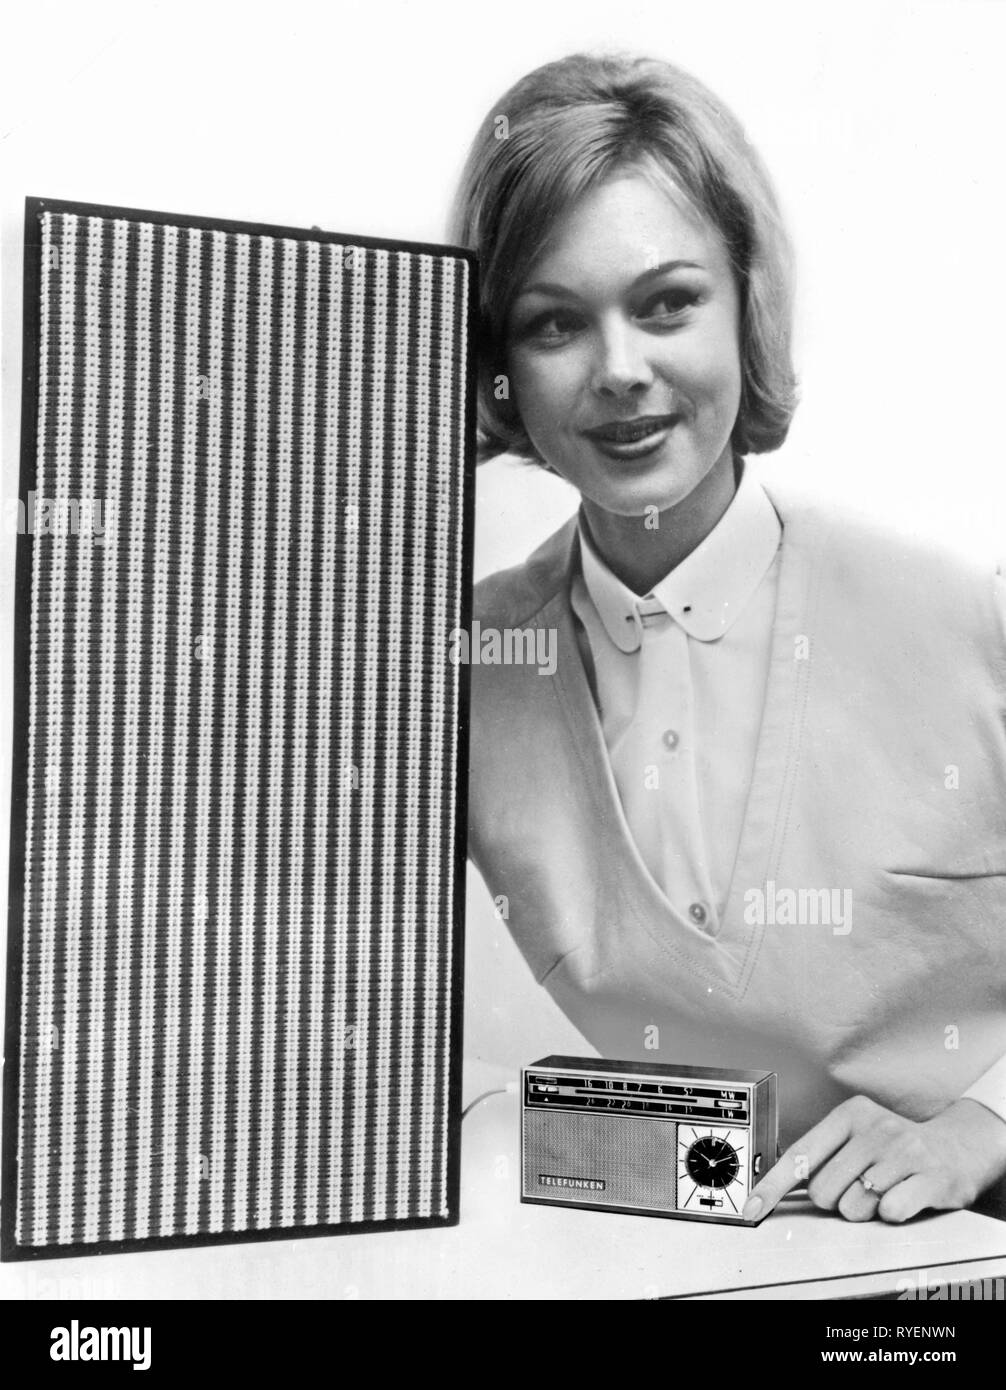 broadcast, radio, radio sets, Telefunken Ticcolo 3461 clock radio, size comparison with a loudspeaker, Germany, April 1964, Additional-Rights-Clearance-Info-Not-Available Stock Photo